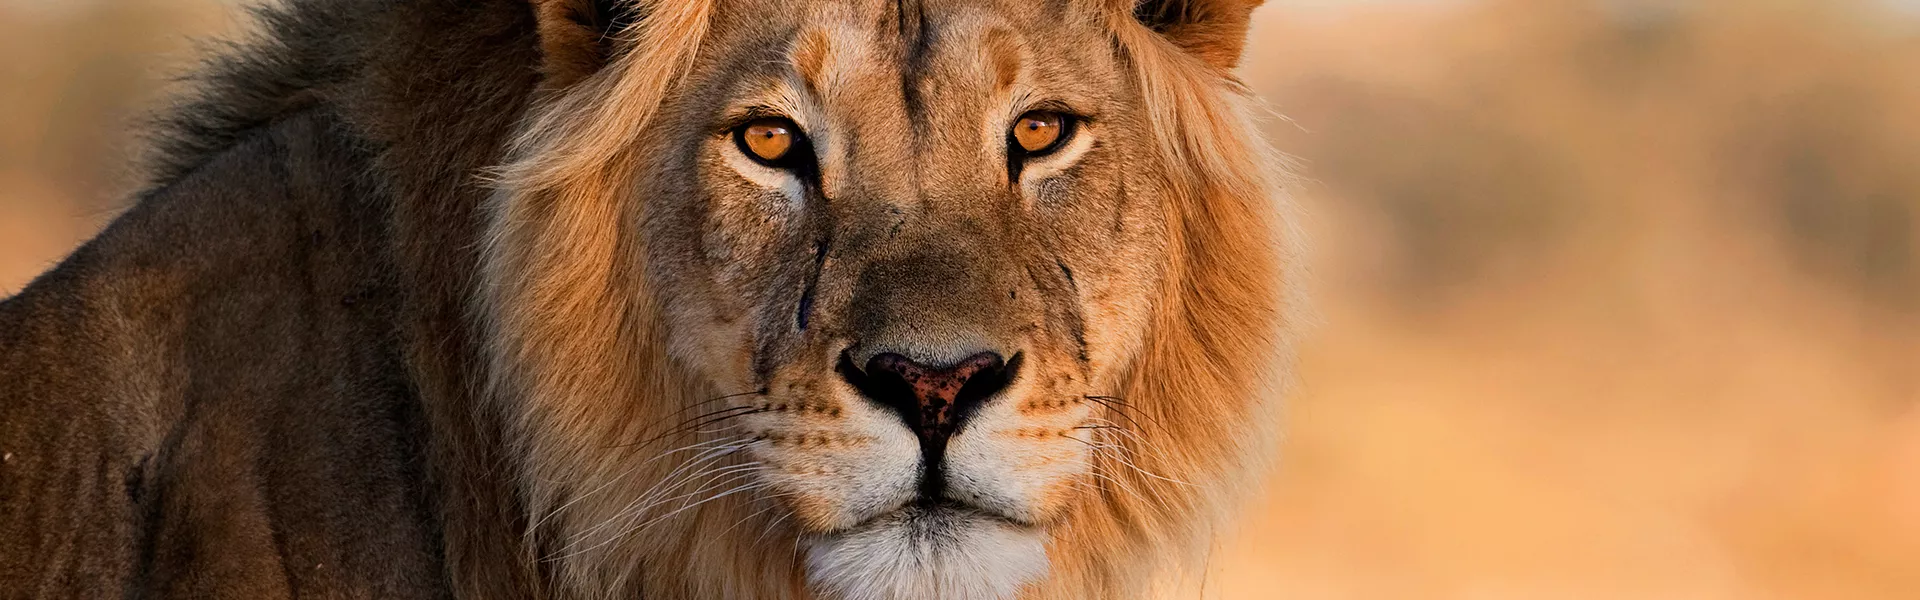 A close up of a lion with a blurry background